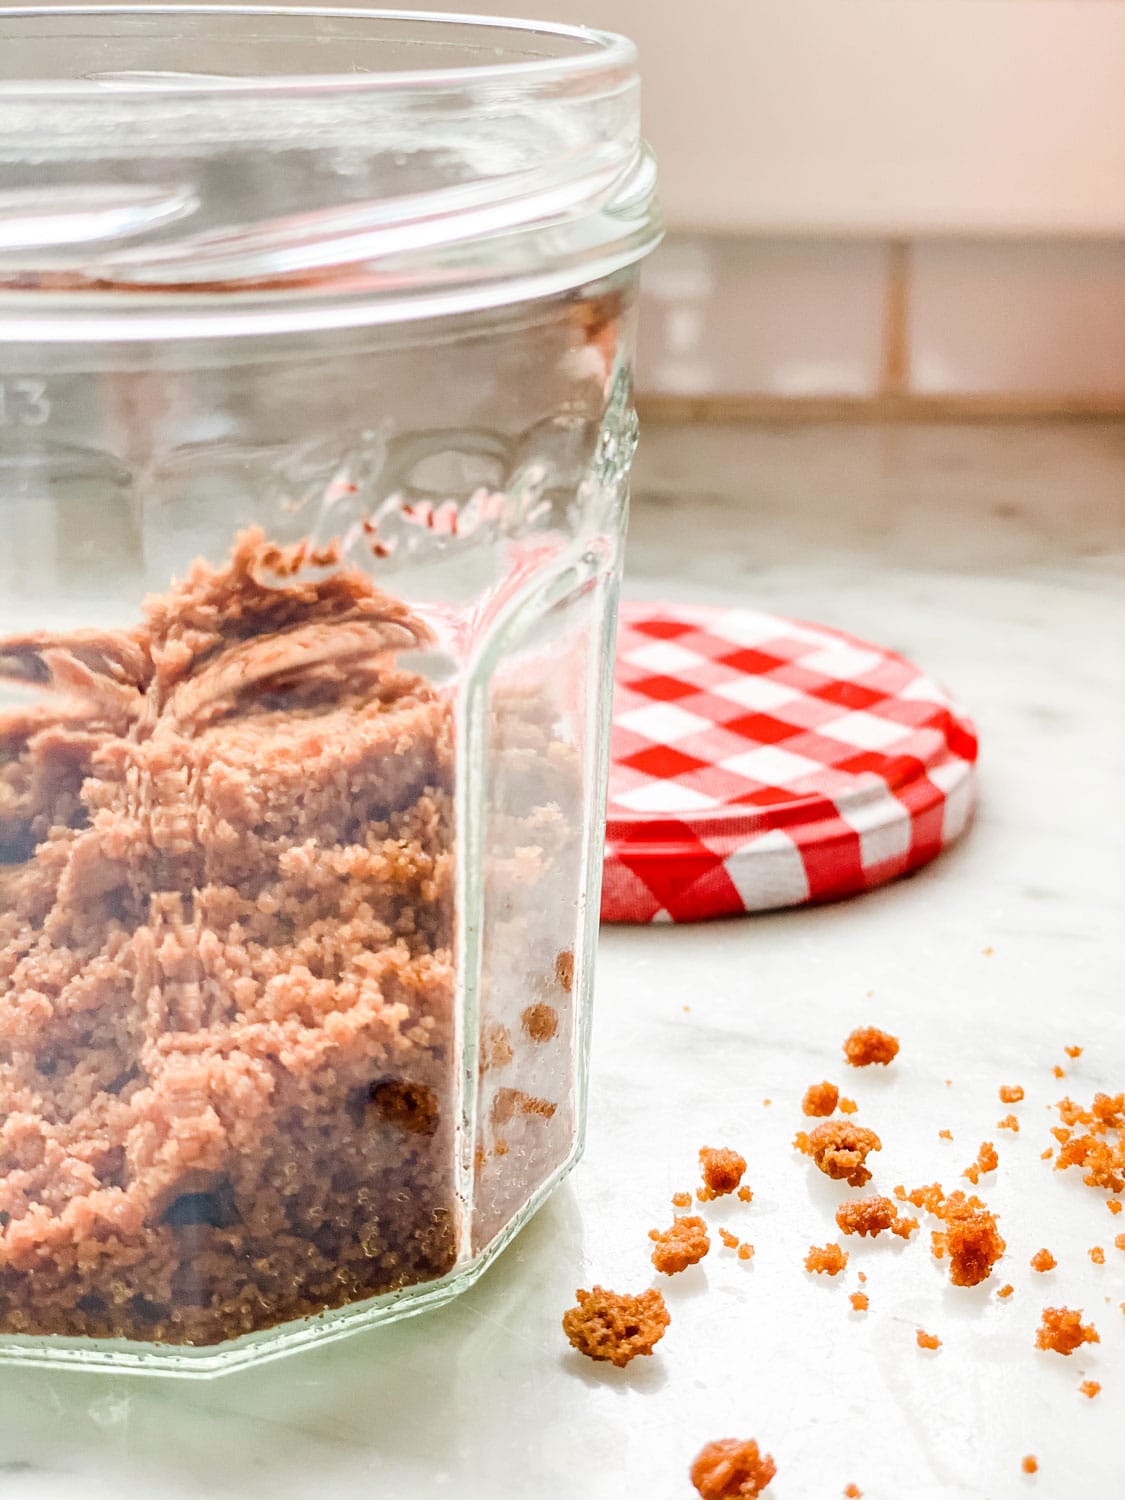 specula's cookie crumbs in a glass jar